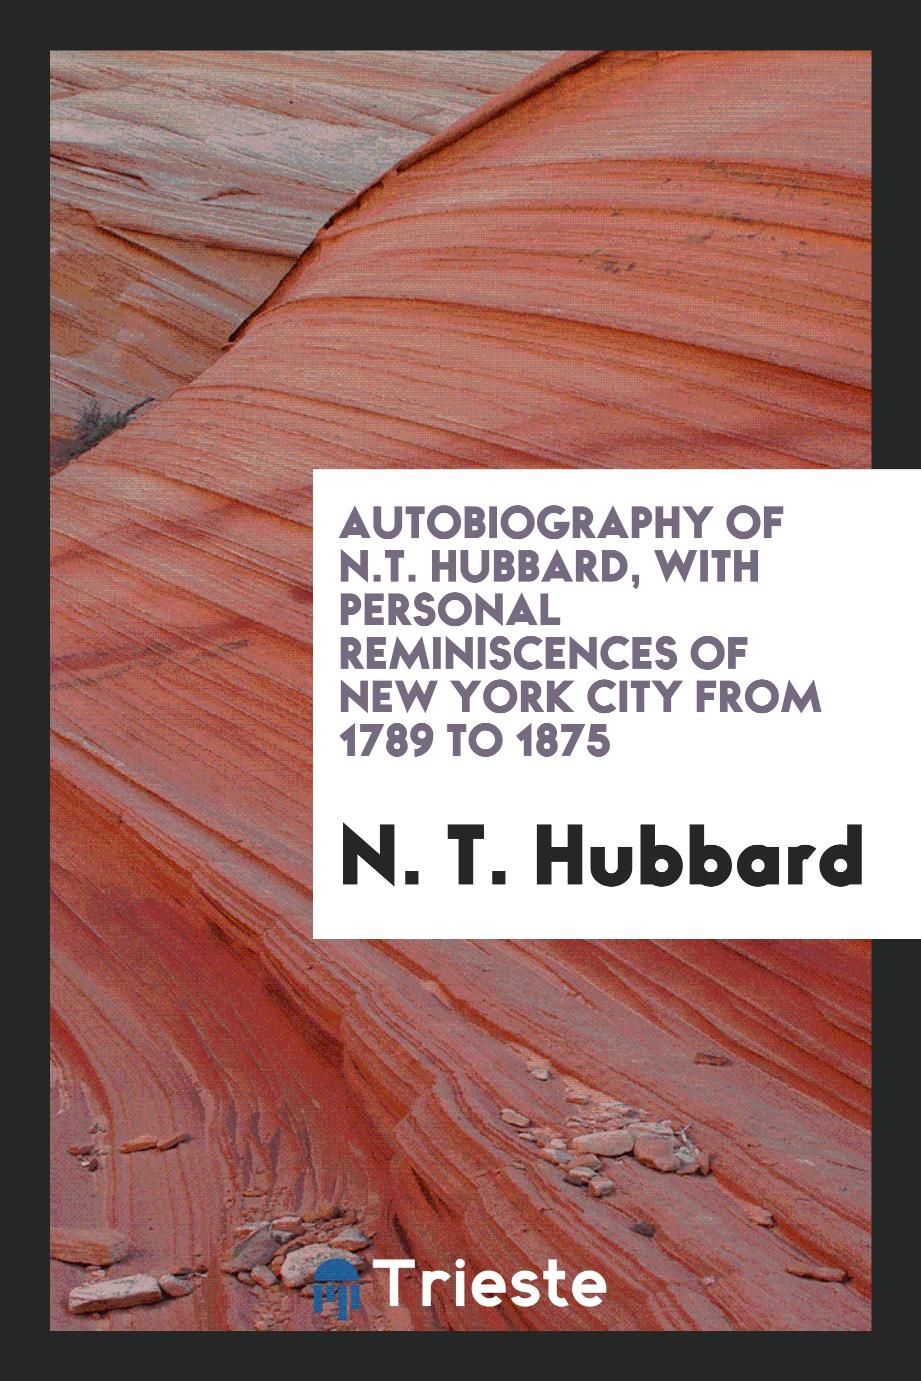 Autobiography of N.T. Hubbard, with personal reminiscences of New York City from 1789 to 1875